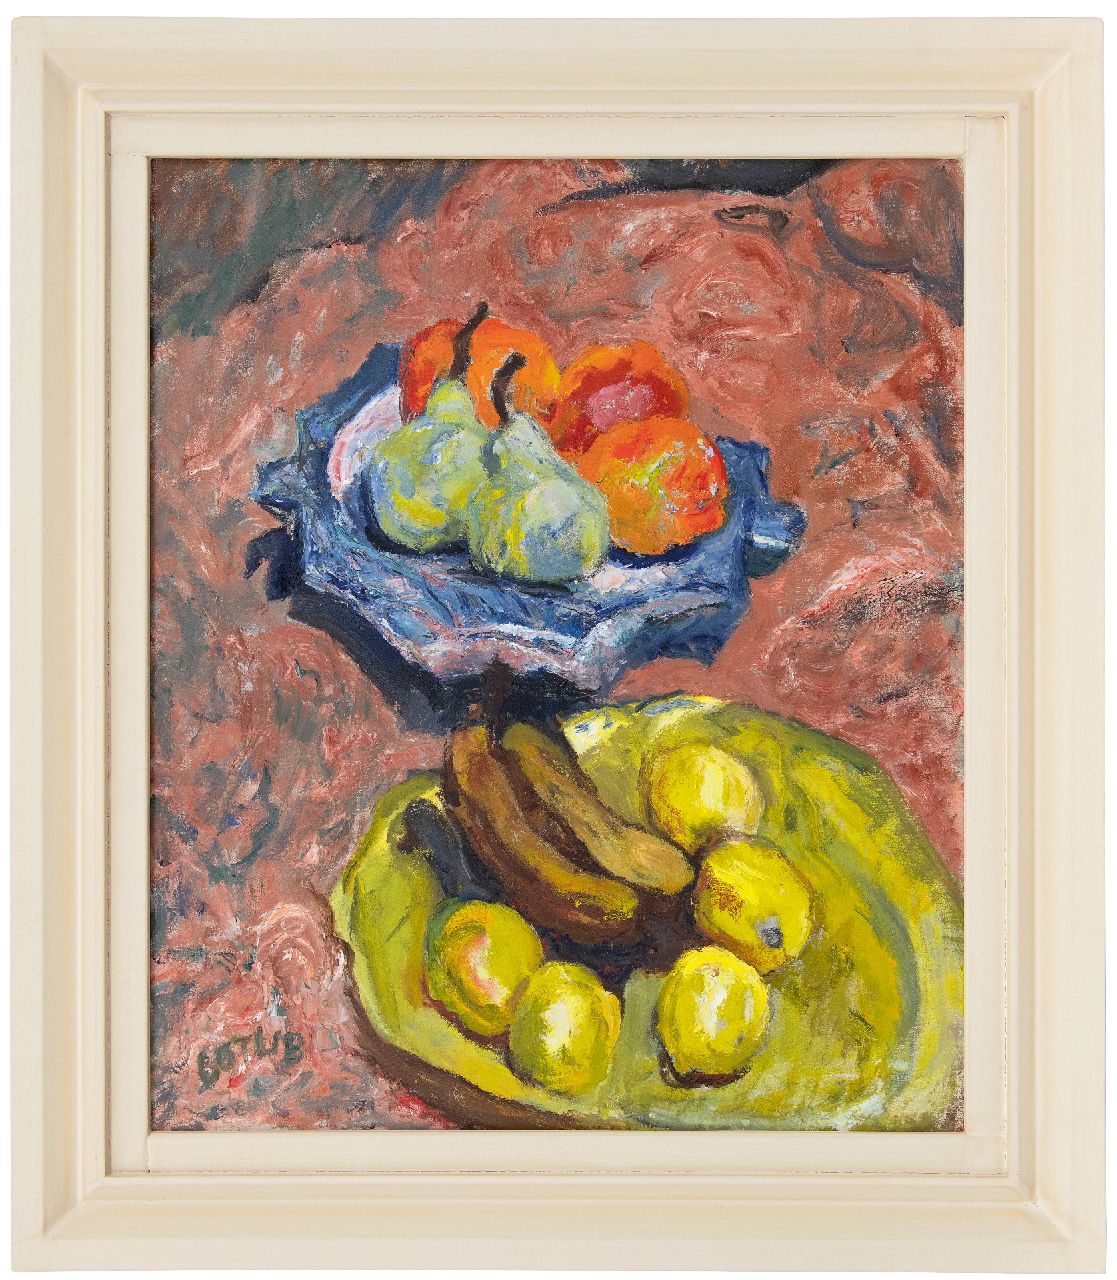 Gotlib H.  | Henryk Gotlib | Paintings offered for sale | Fruit in two bowls, oil on canvas 76.3 x 63.7 cm, signed l.l. and painted ca. 1962